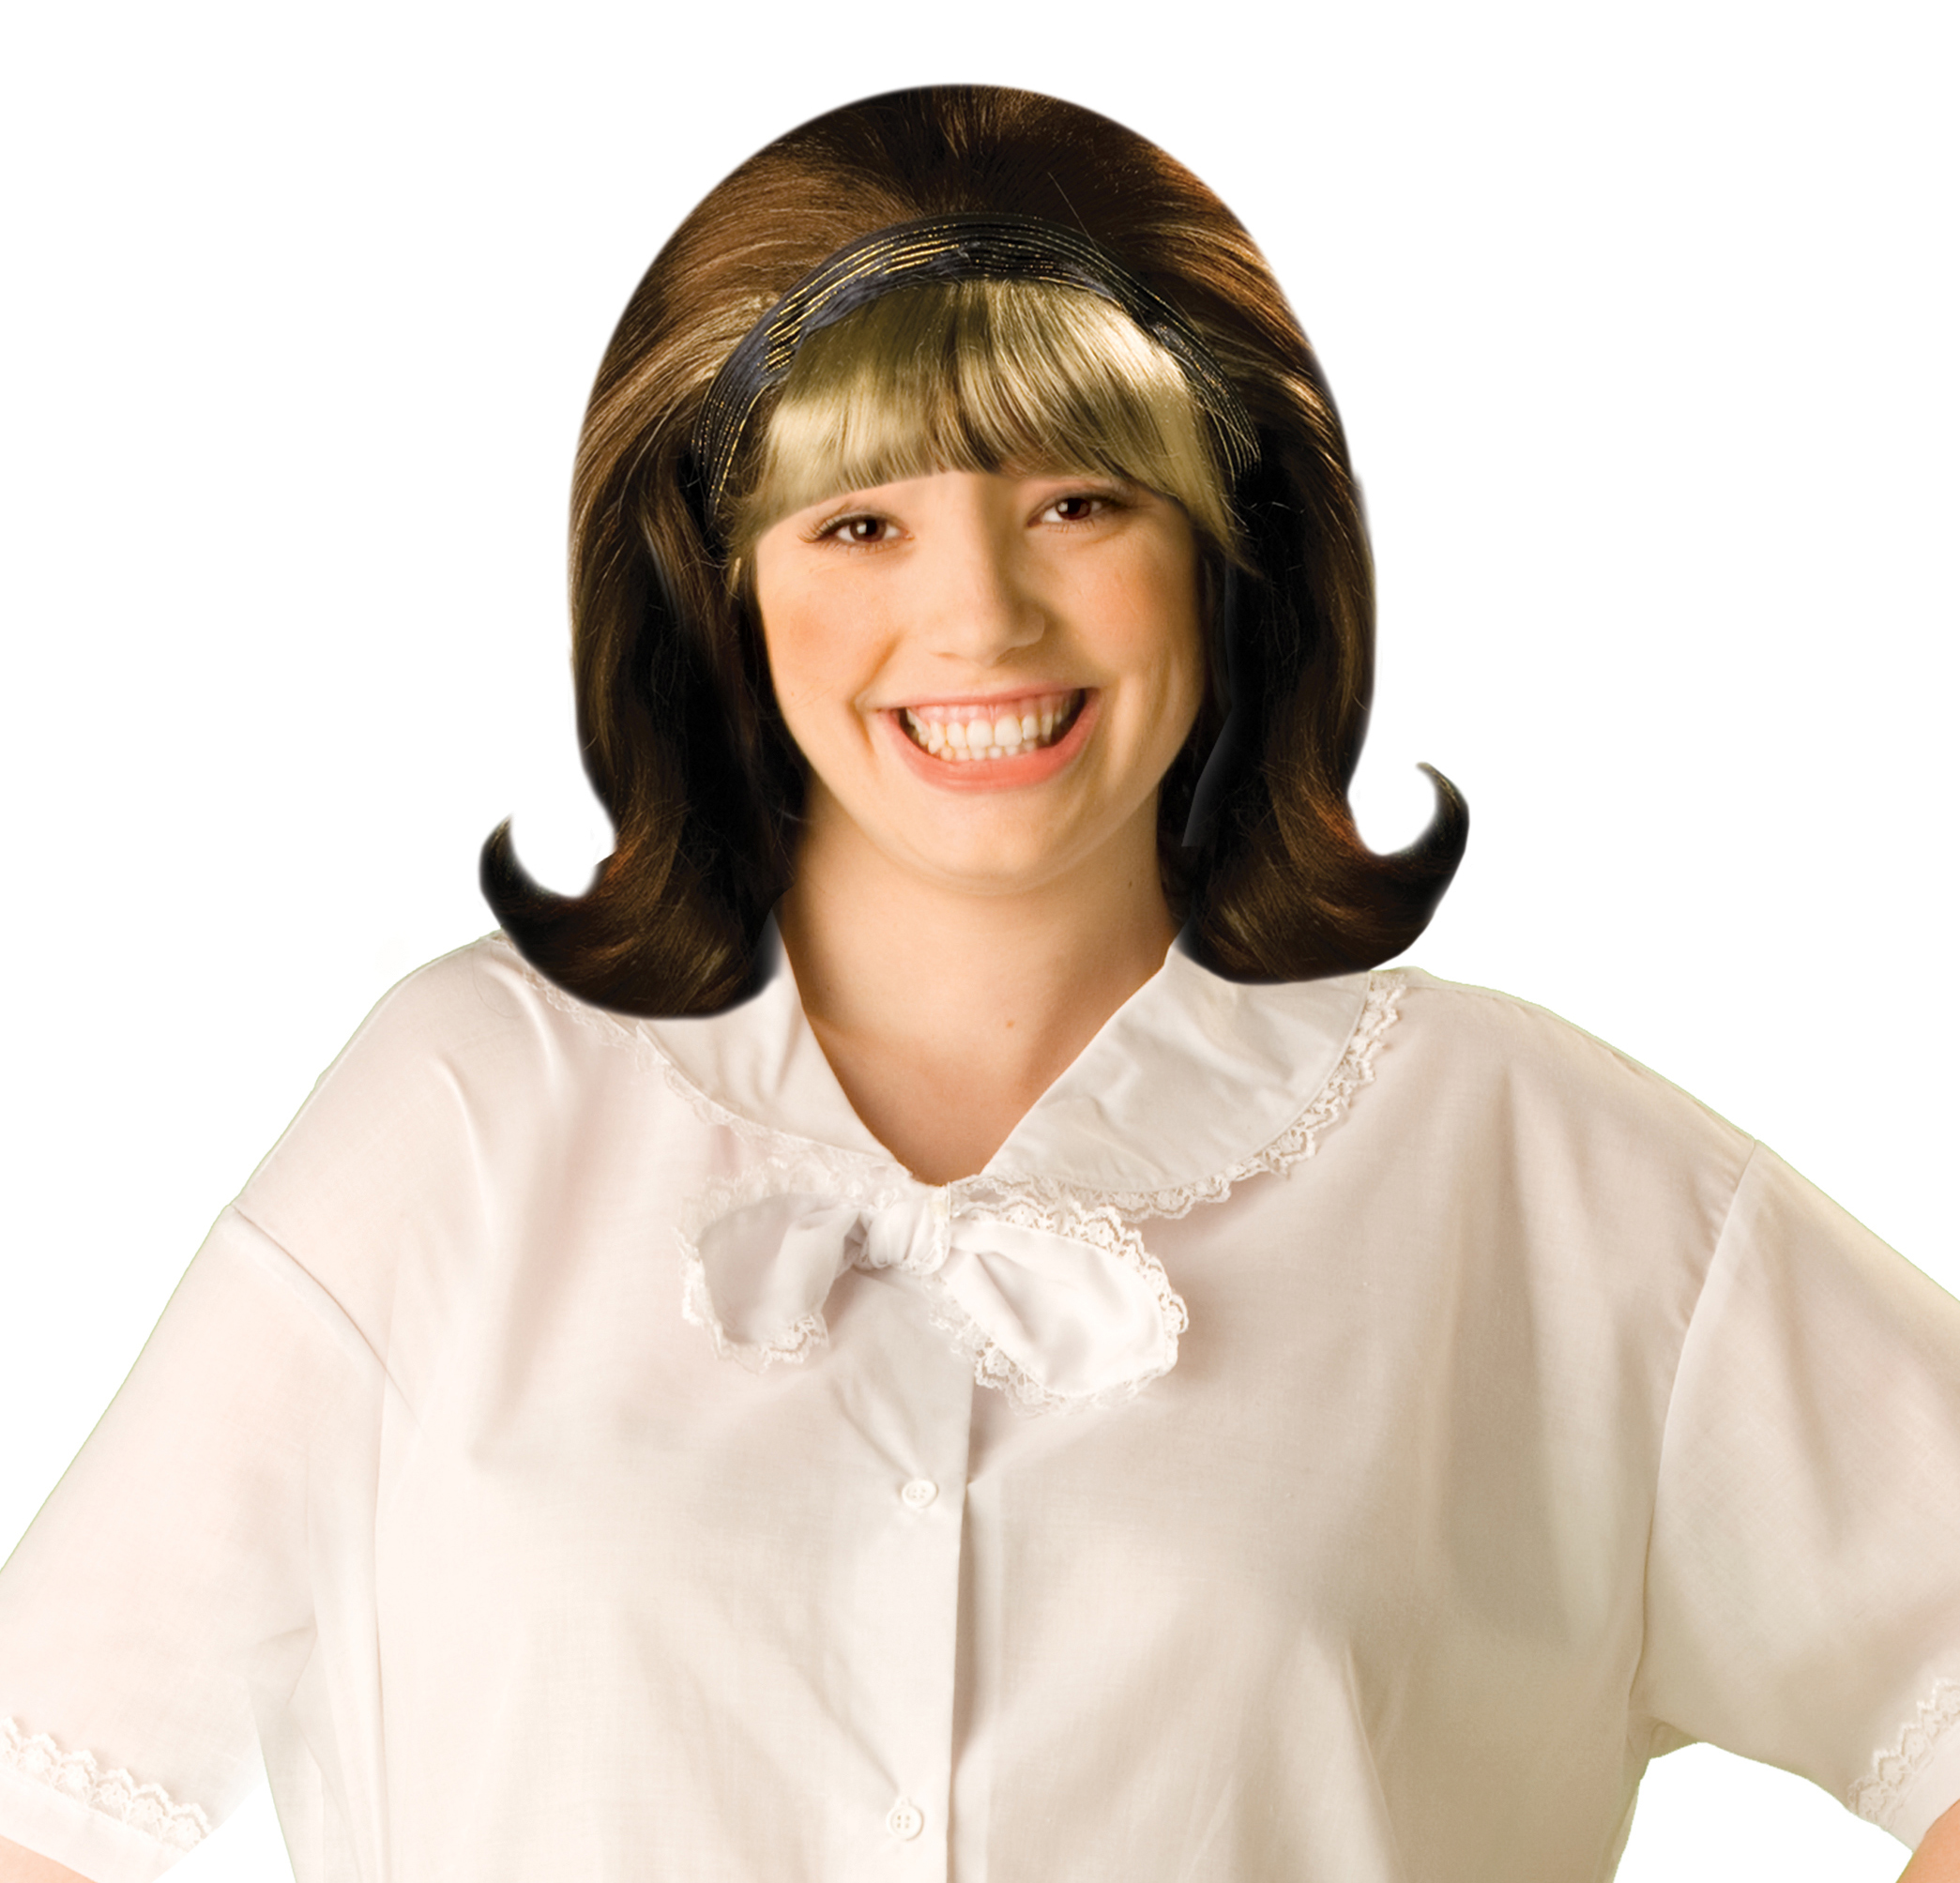 AMC Women's Hairspray Tracy Turnblad Frosted Wig